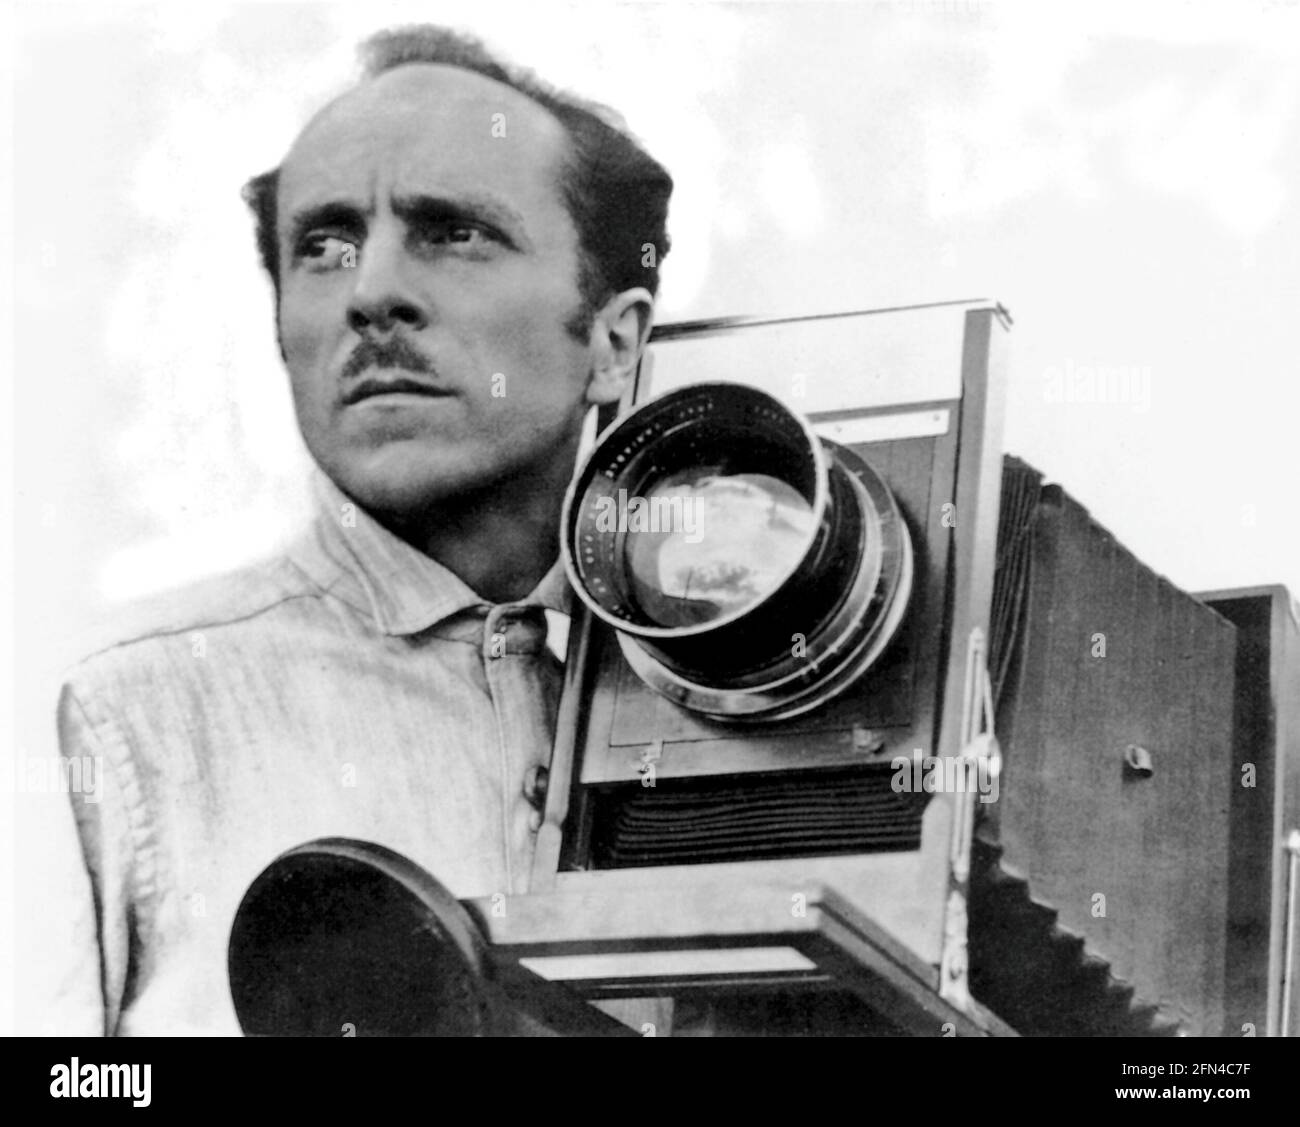 Weston, Edward, 24.3.1886 - 1.1.1958, American photographer, with his Graflex camera, ADDITIONAL-RIGHTS-CLEARANCE-INFO-NOT-AVAILABLE Stock Photo